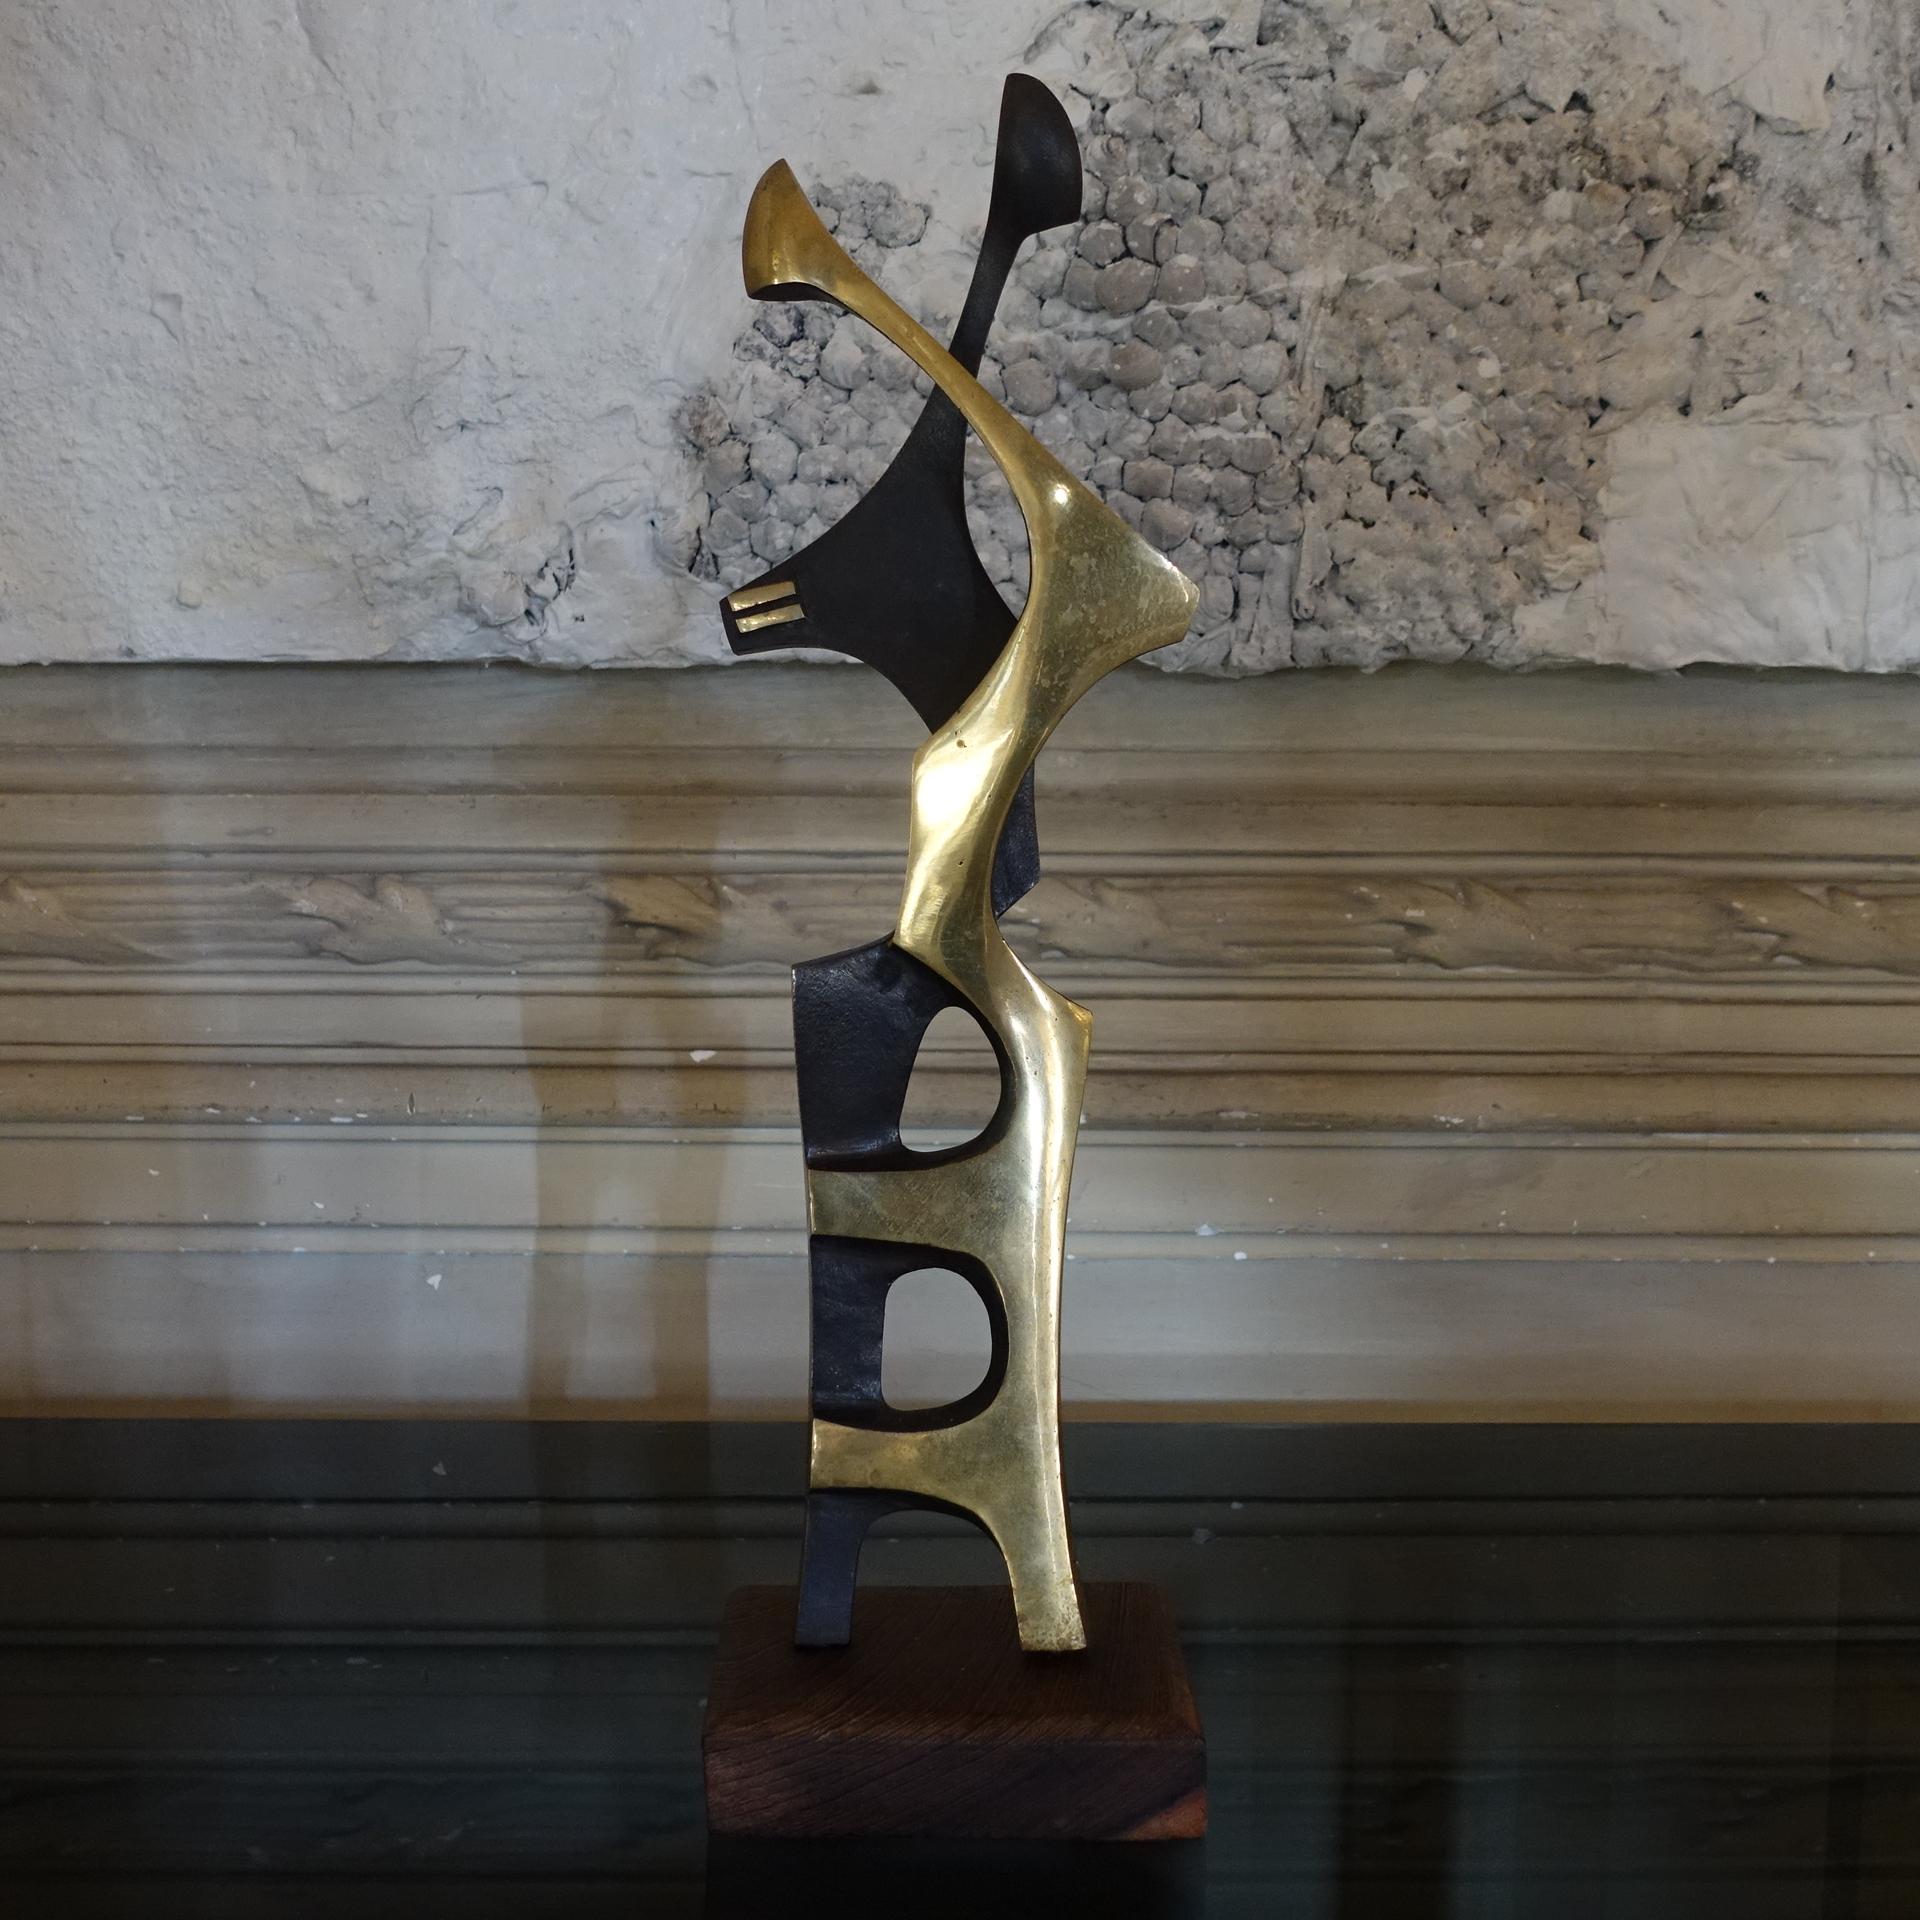 Abstracd bronze sculpture on wood base, perfect condition and vintage patina, signed Tandu. L. 2015.
   